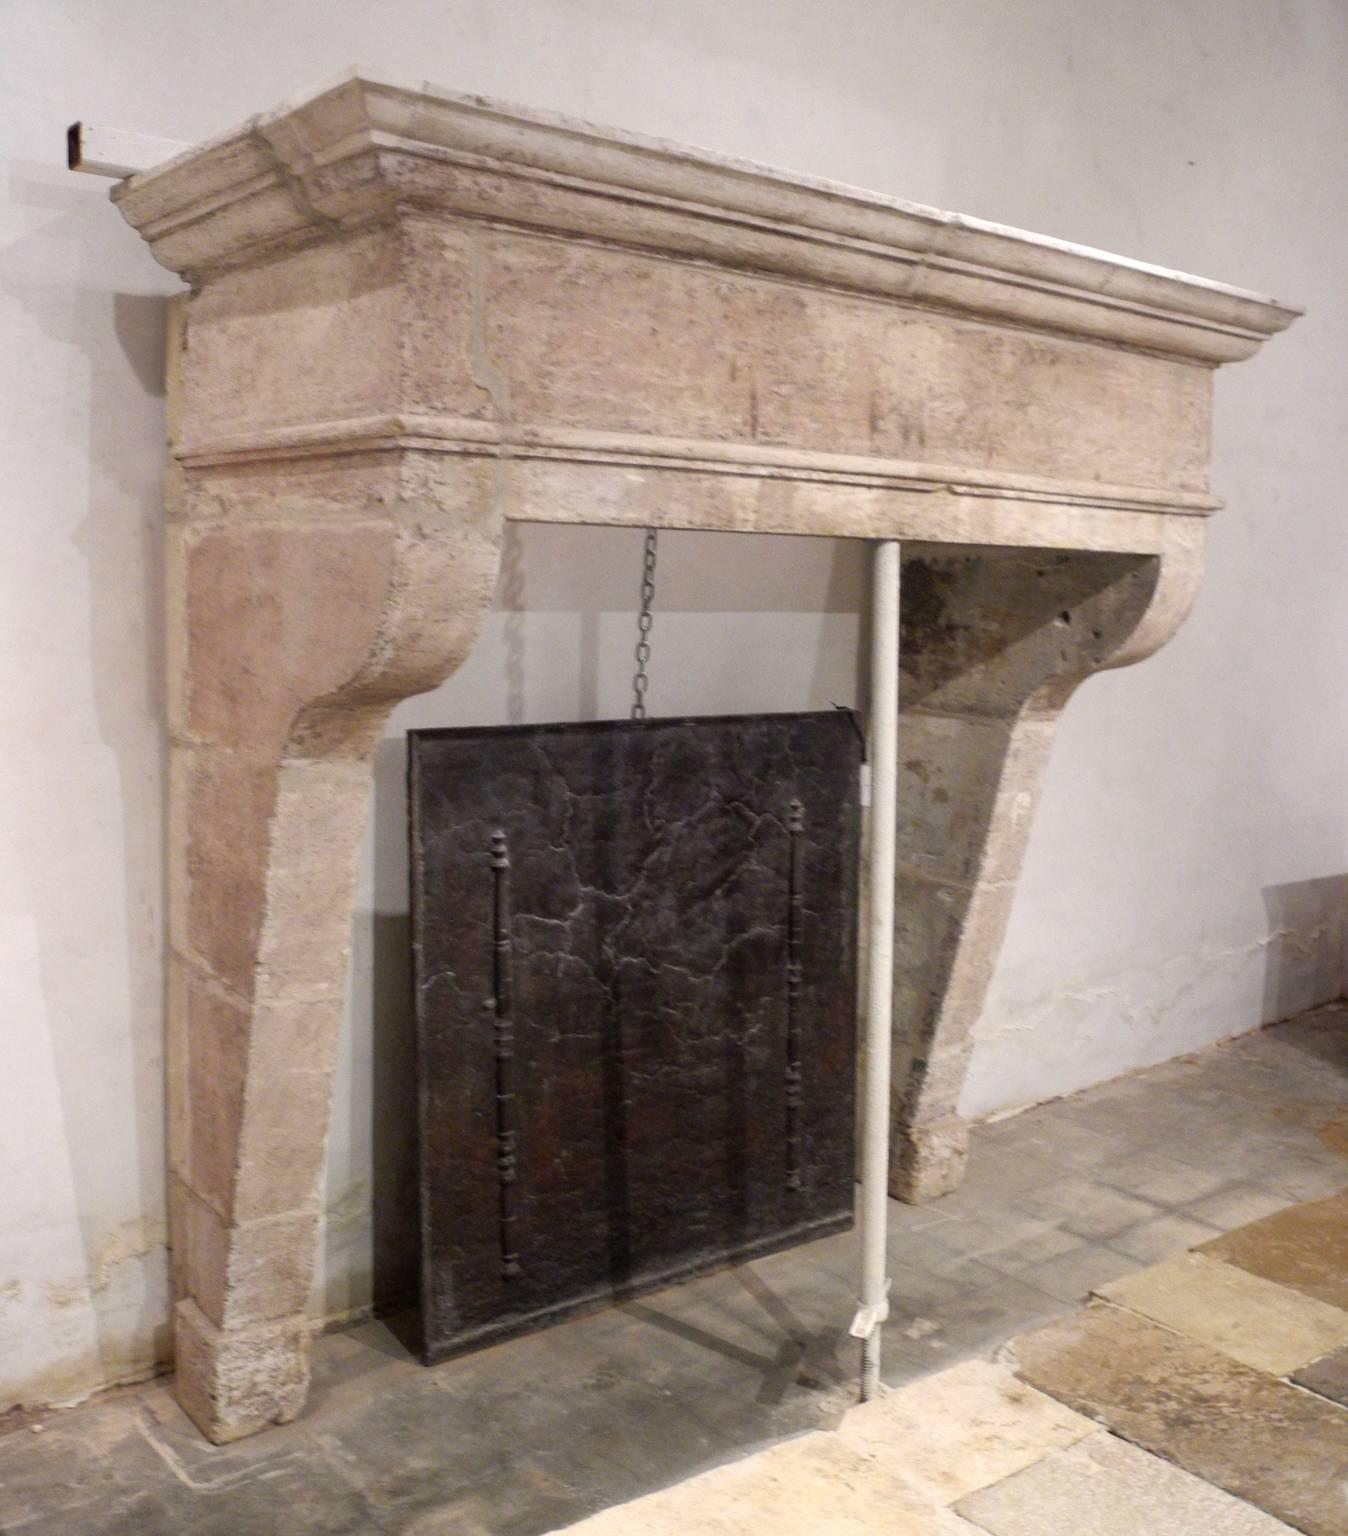 This is a spectacular 18th century mantel from a longère (Brittany style farmhouse) near the Bretagne Commune of Pontivy. It has been beautifully reclaimed, leaving it in it's original rose-hued stone color. It is relatively large; it can be used